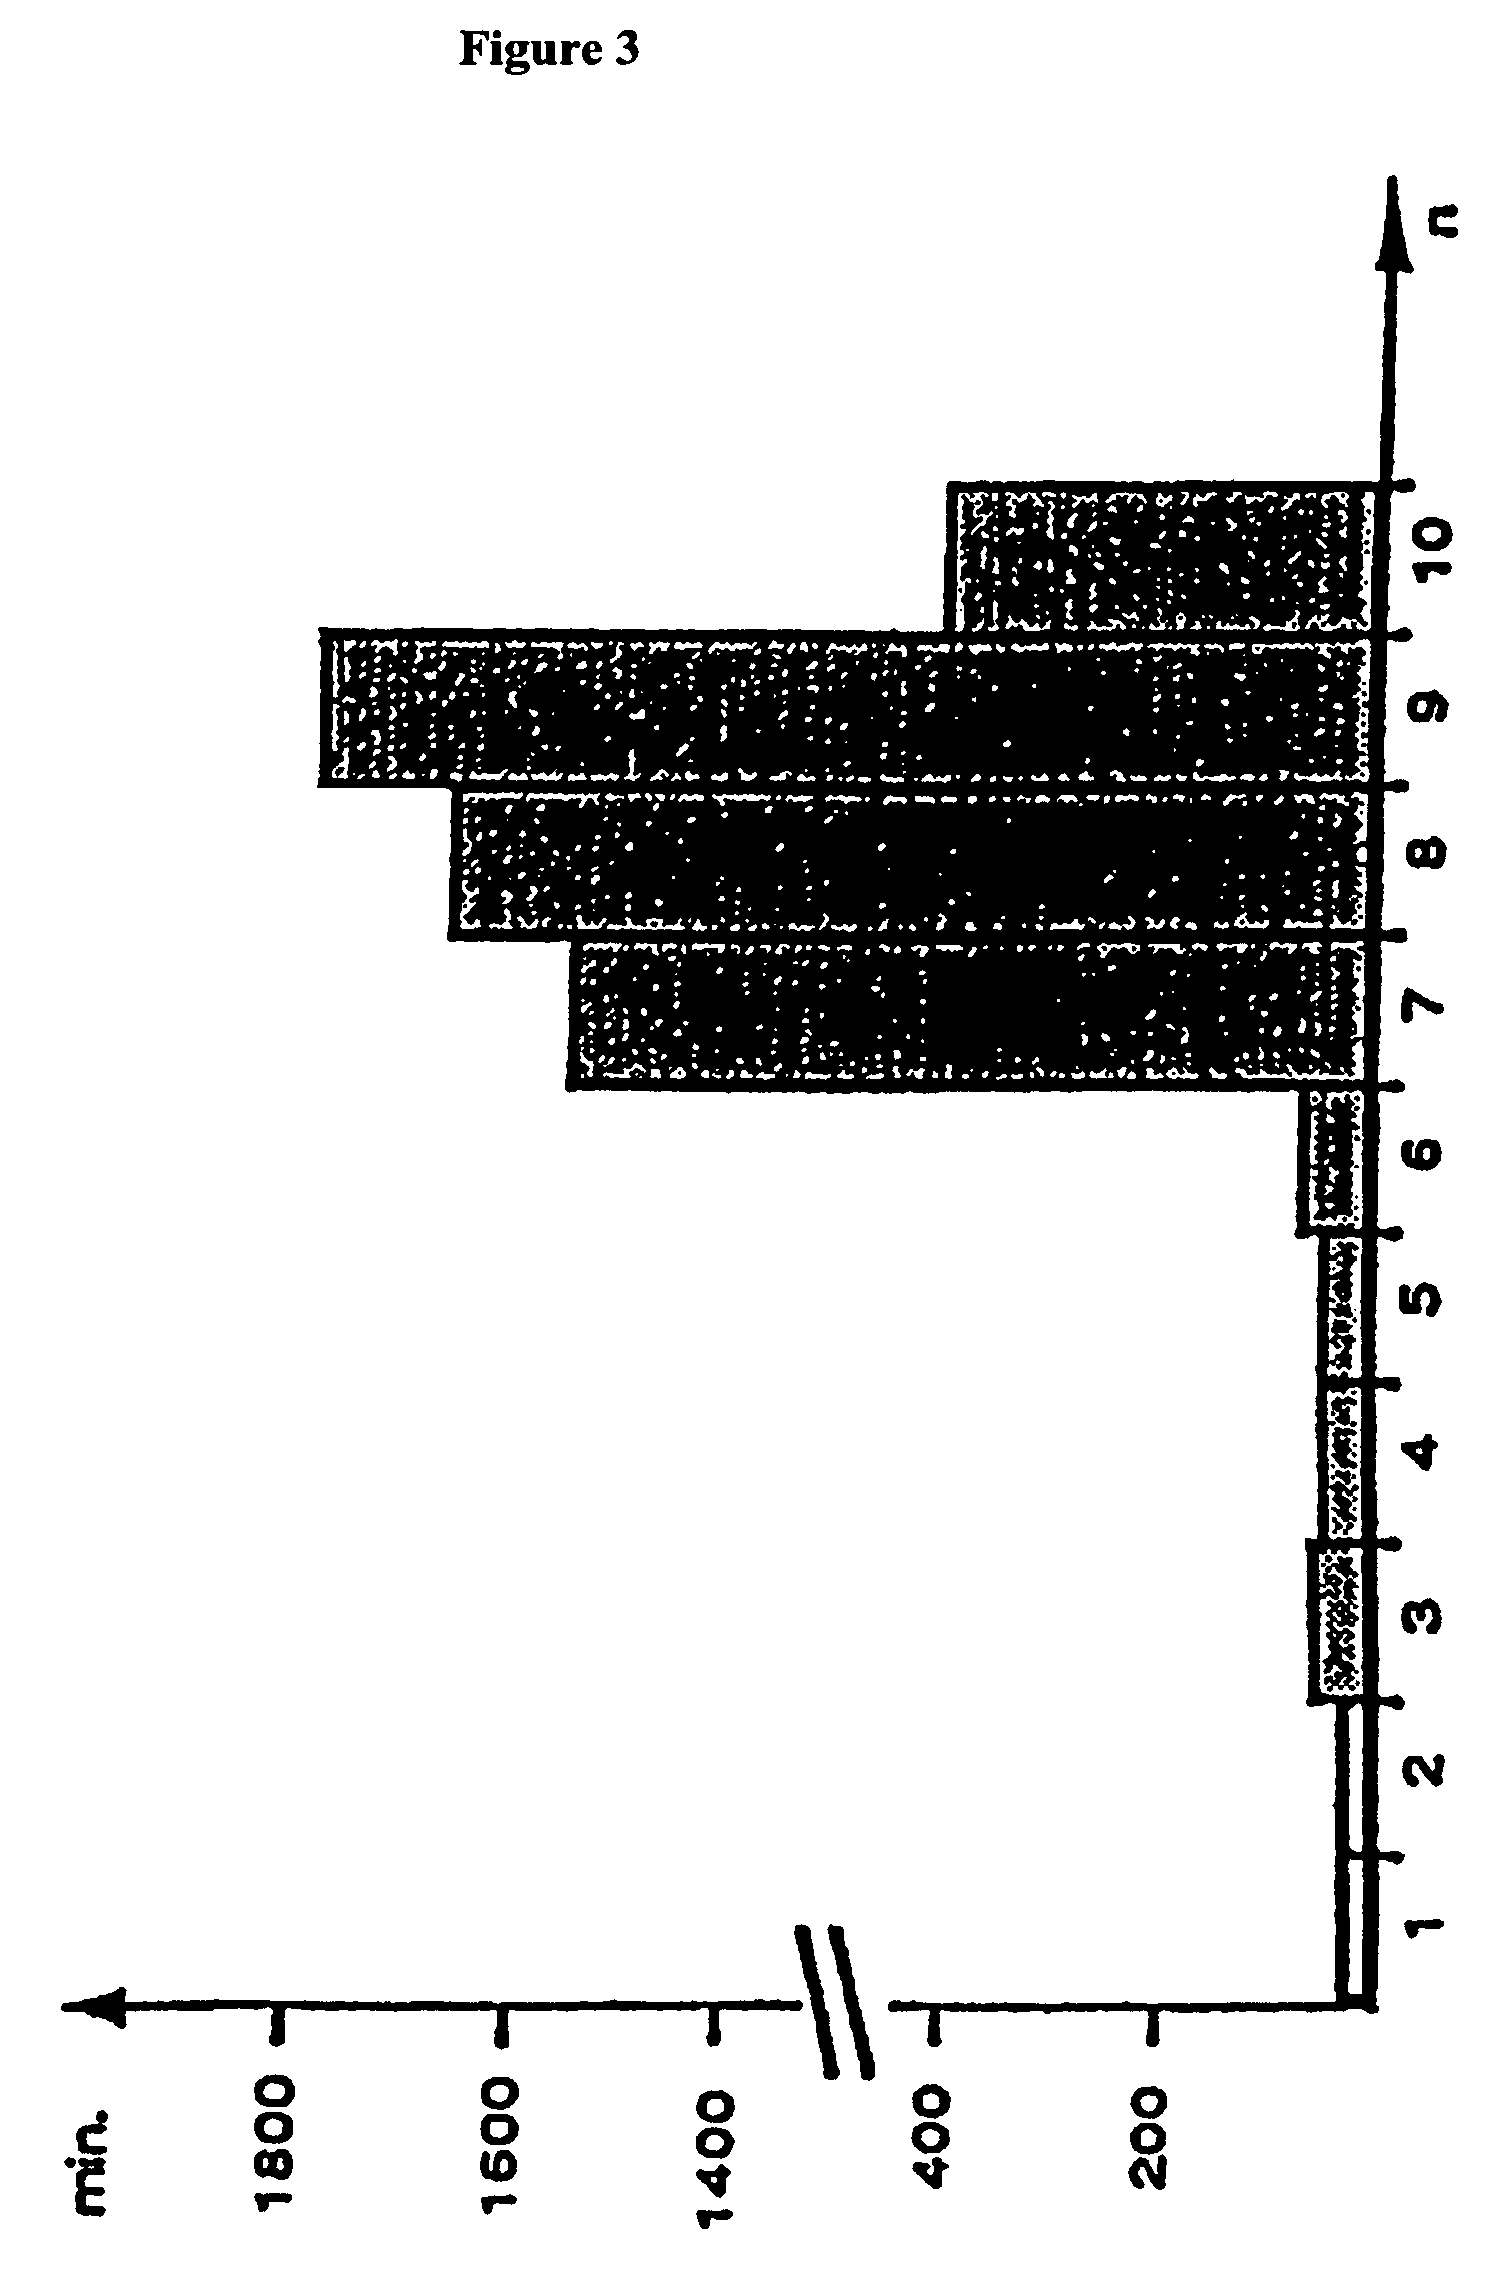 Solid-phase peptide synthesis and agent for use in such synthesis